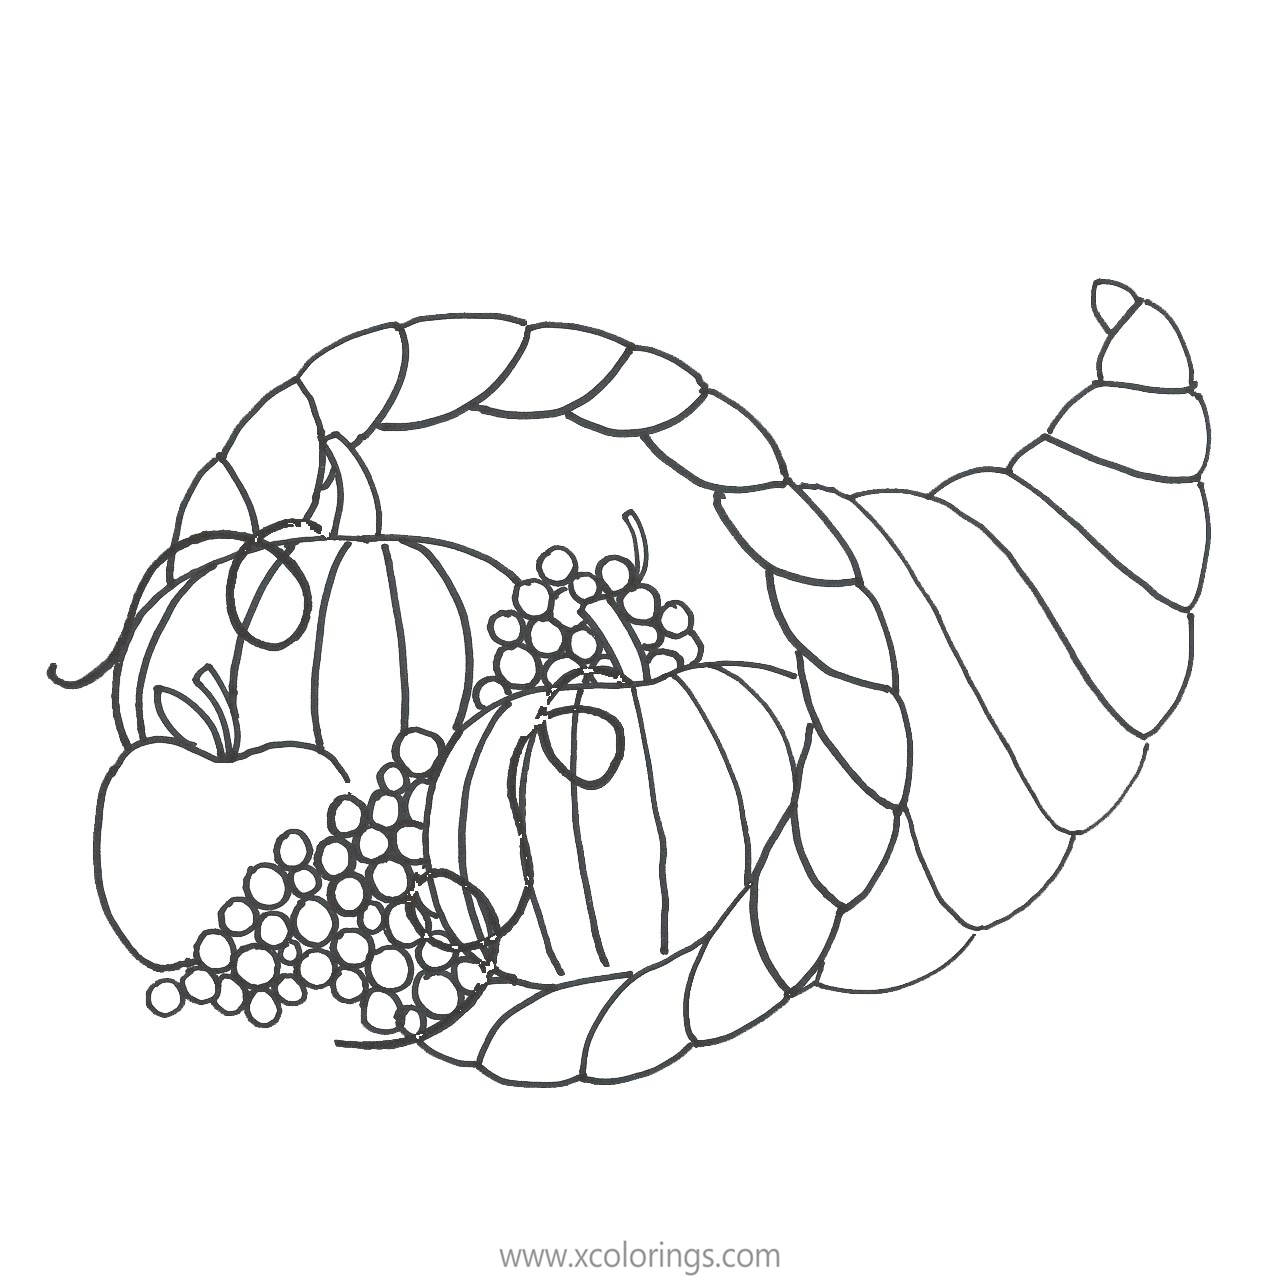 Free Cornucopia Coloring Pages with Pumpkins printable